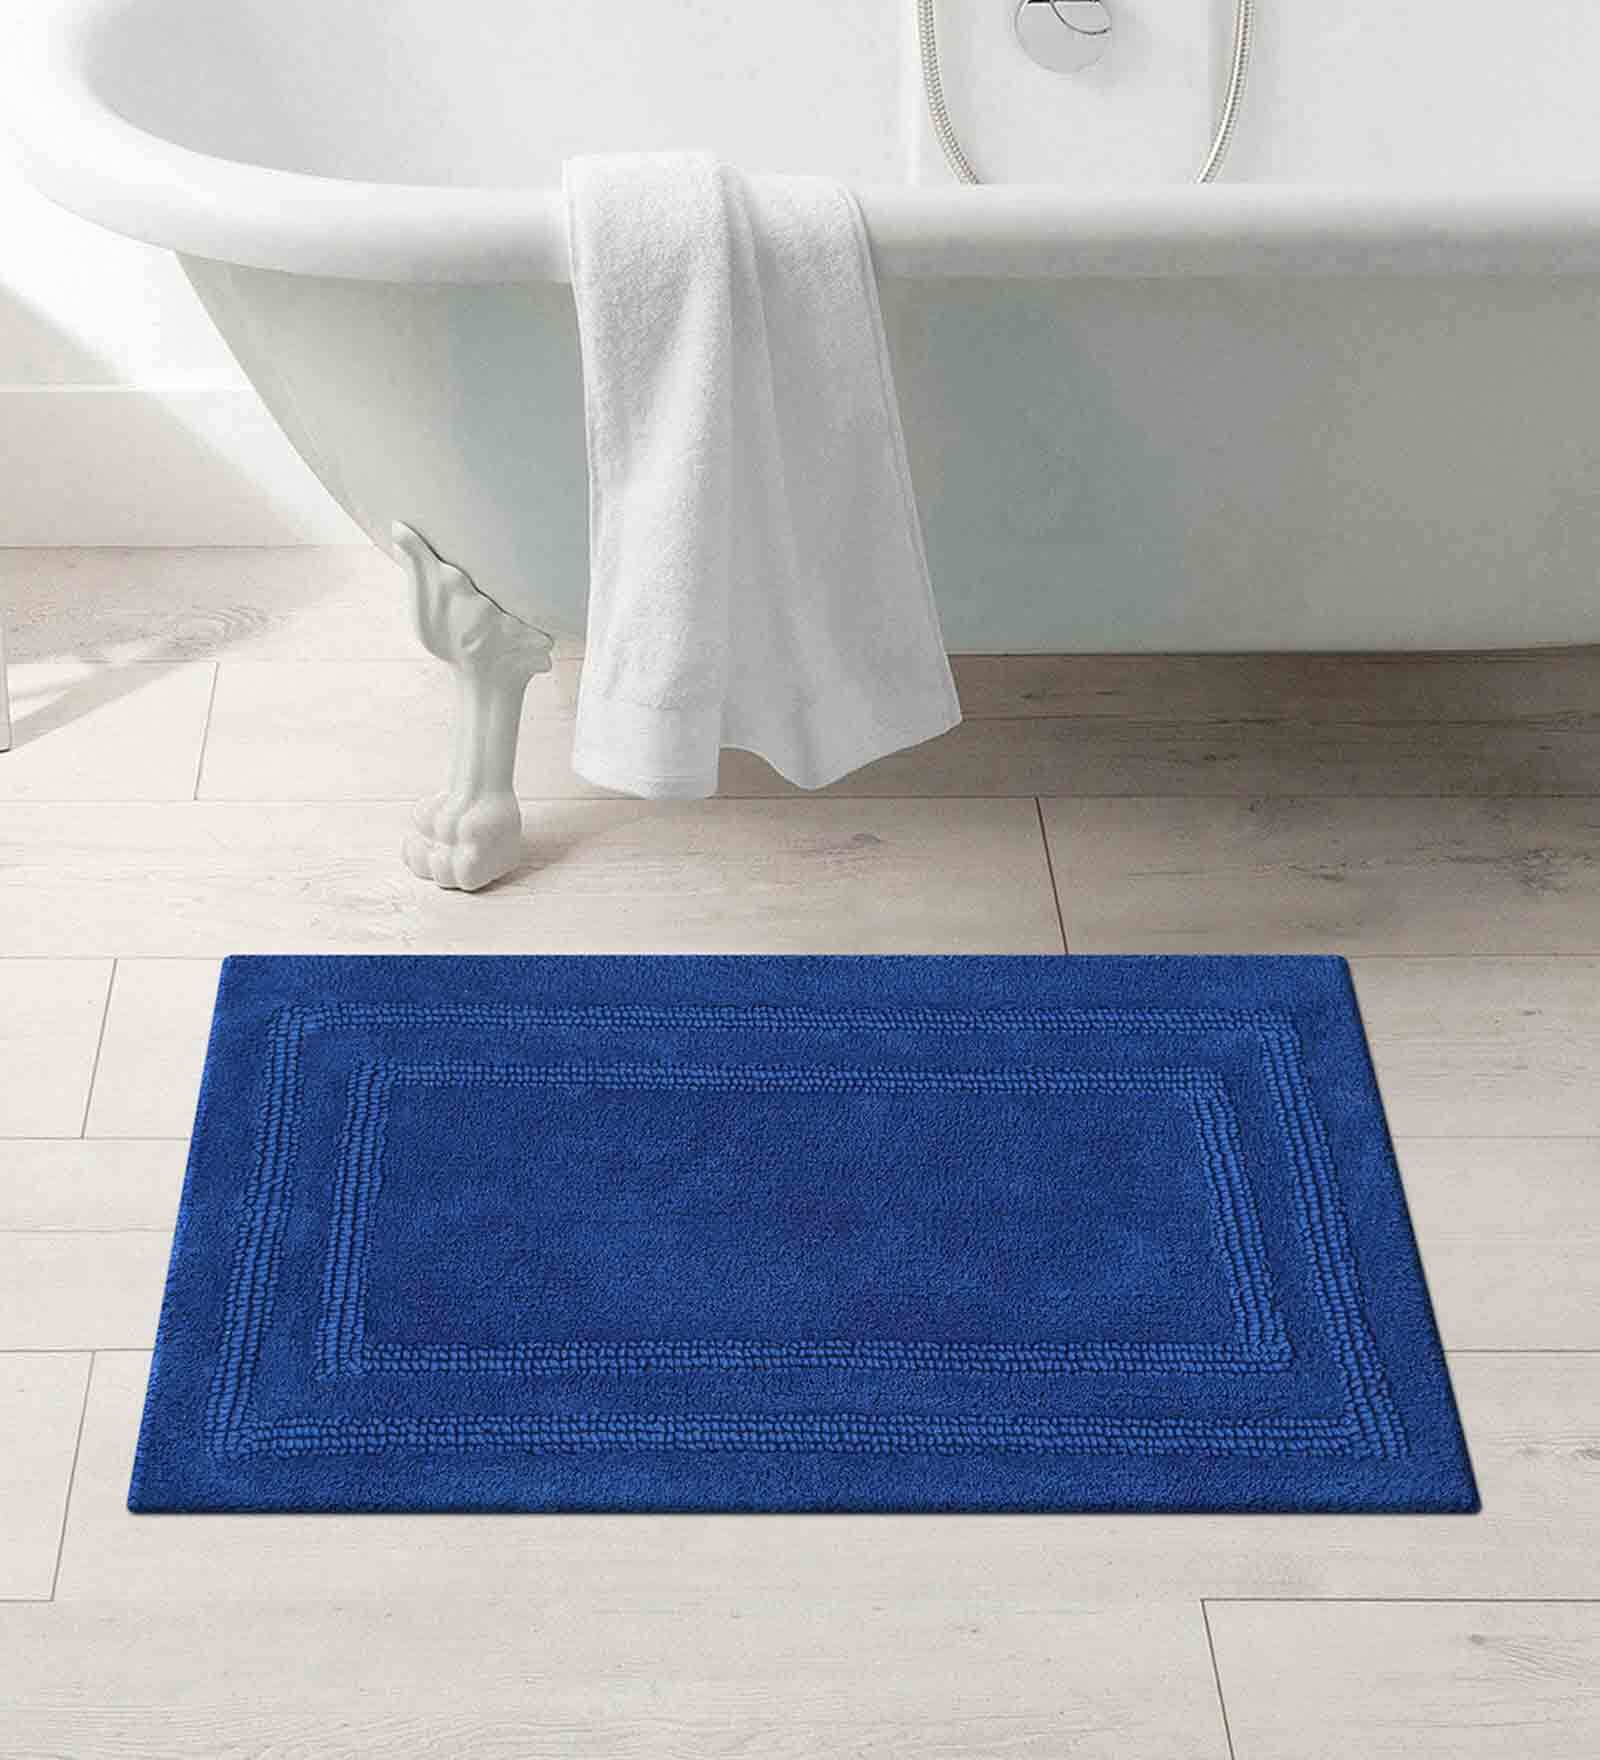 Buy Casanova Bath Mat 50 x W 80 cm in Blue Color by Obsessions Online -  Solid Colour Bath Mats - Bath Mats - Furnishings - Pepperfry Product